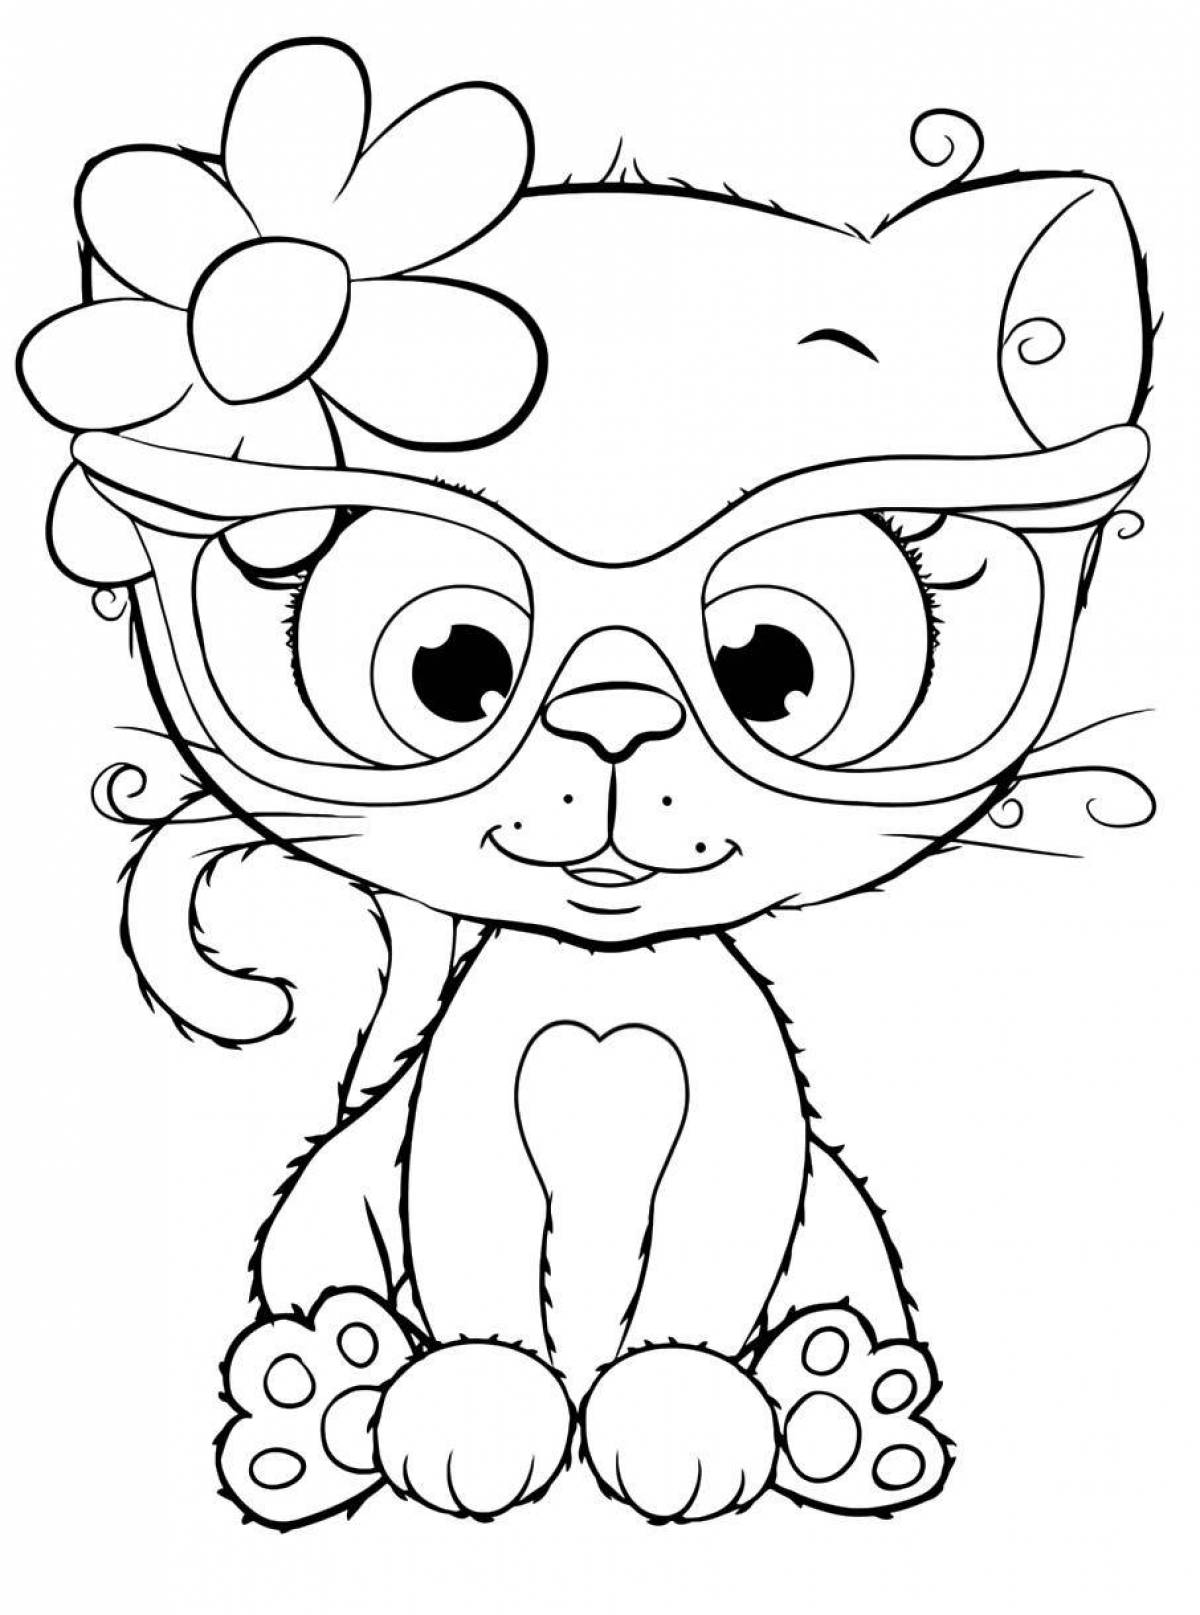 Cute and wavy cat coloring page